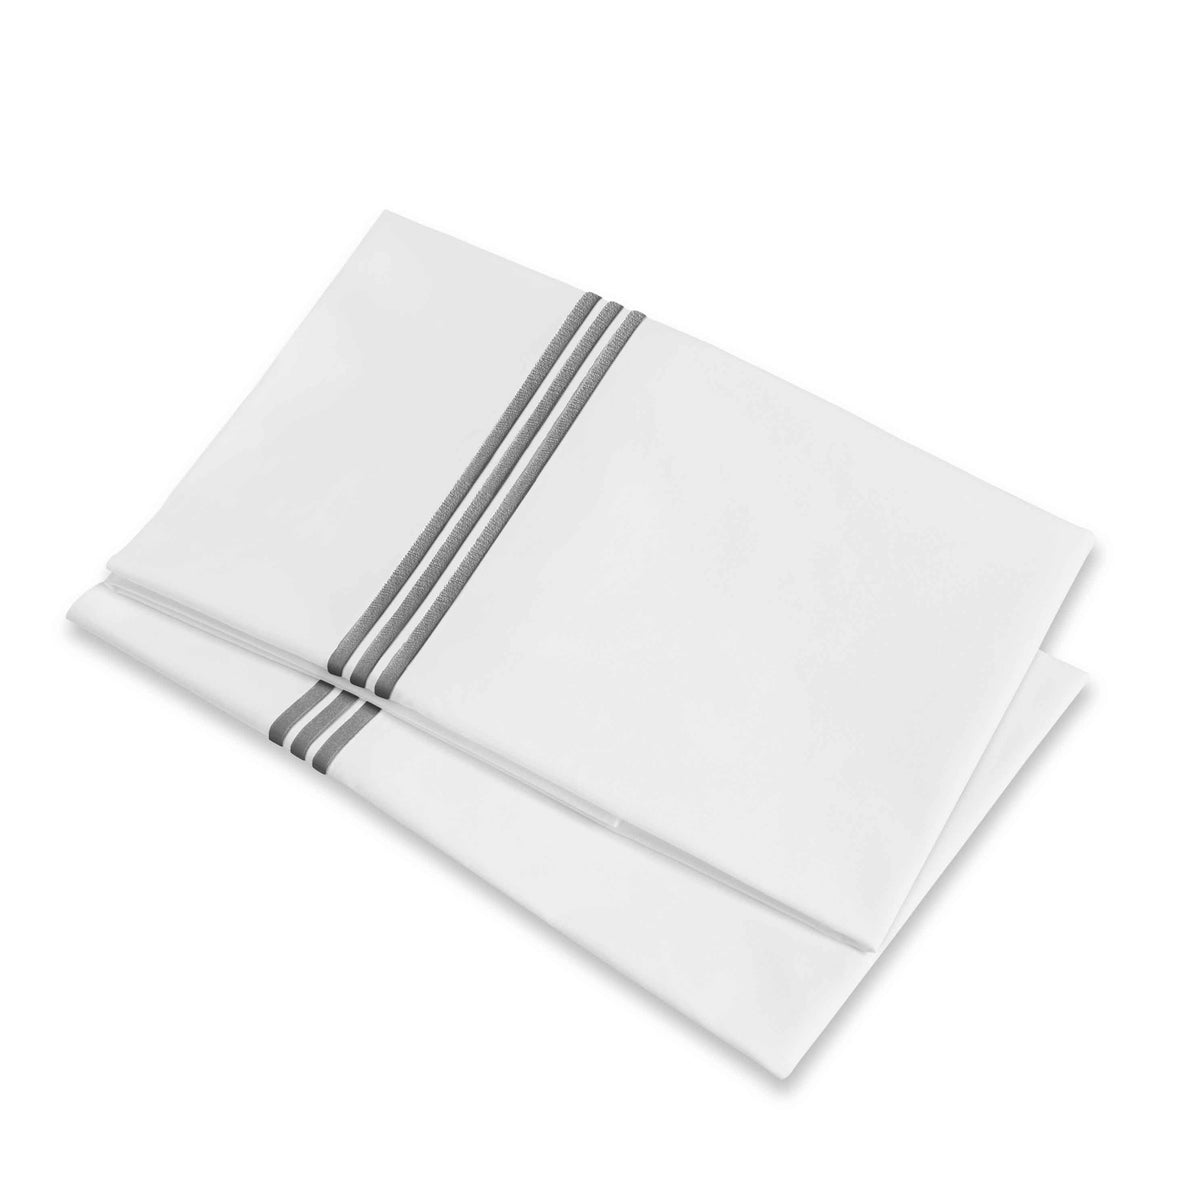 Folded Pillowcases of Signoria Platinum Percale Bedding in White/Silver Moon Color